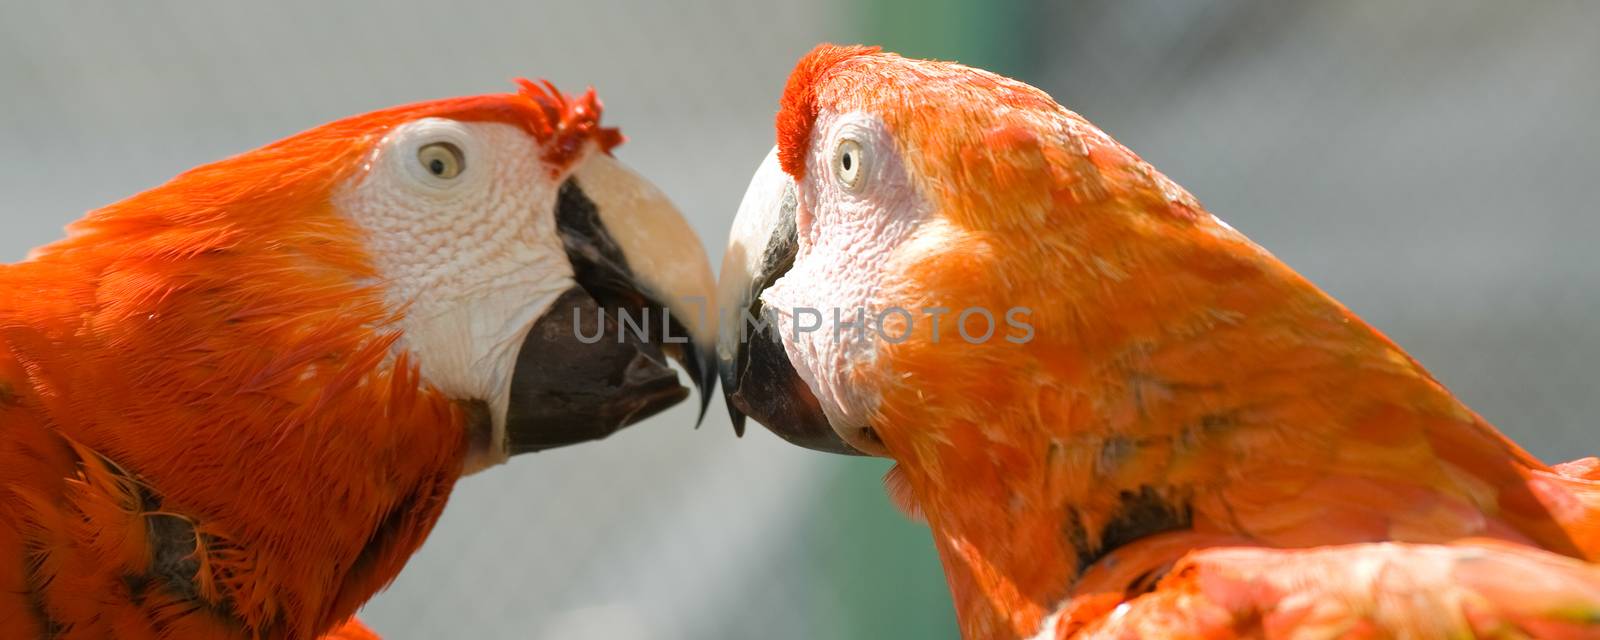 Close-up of a pair of macaws in love, Miami, Florida, USA